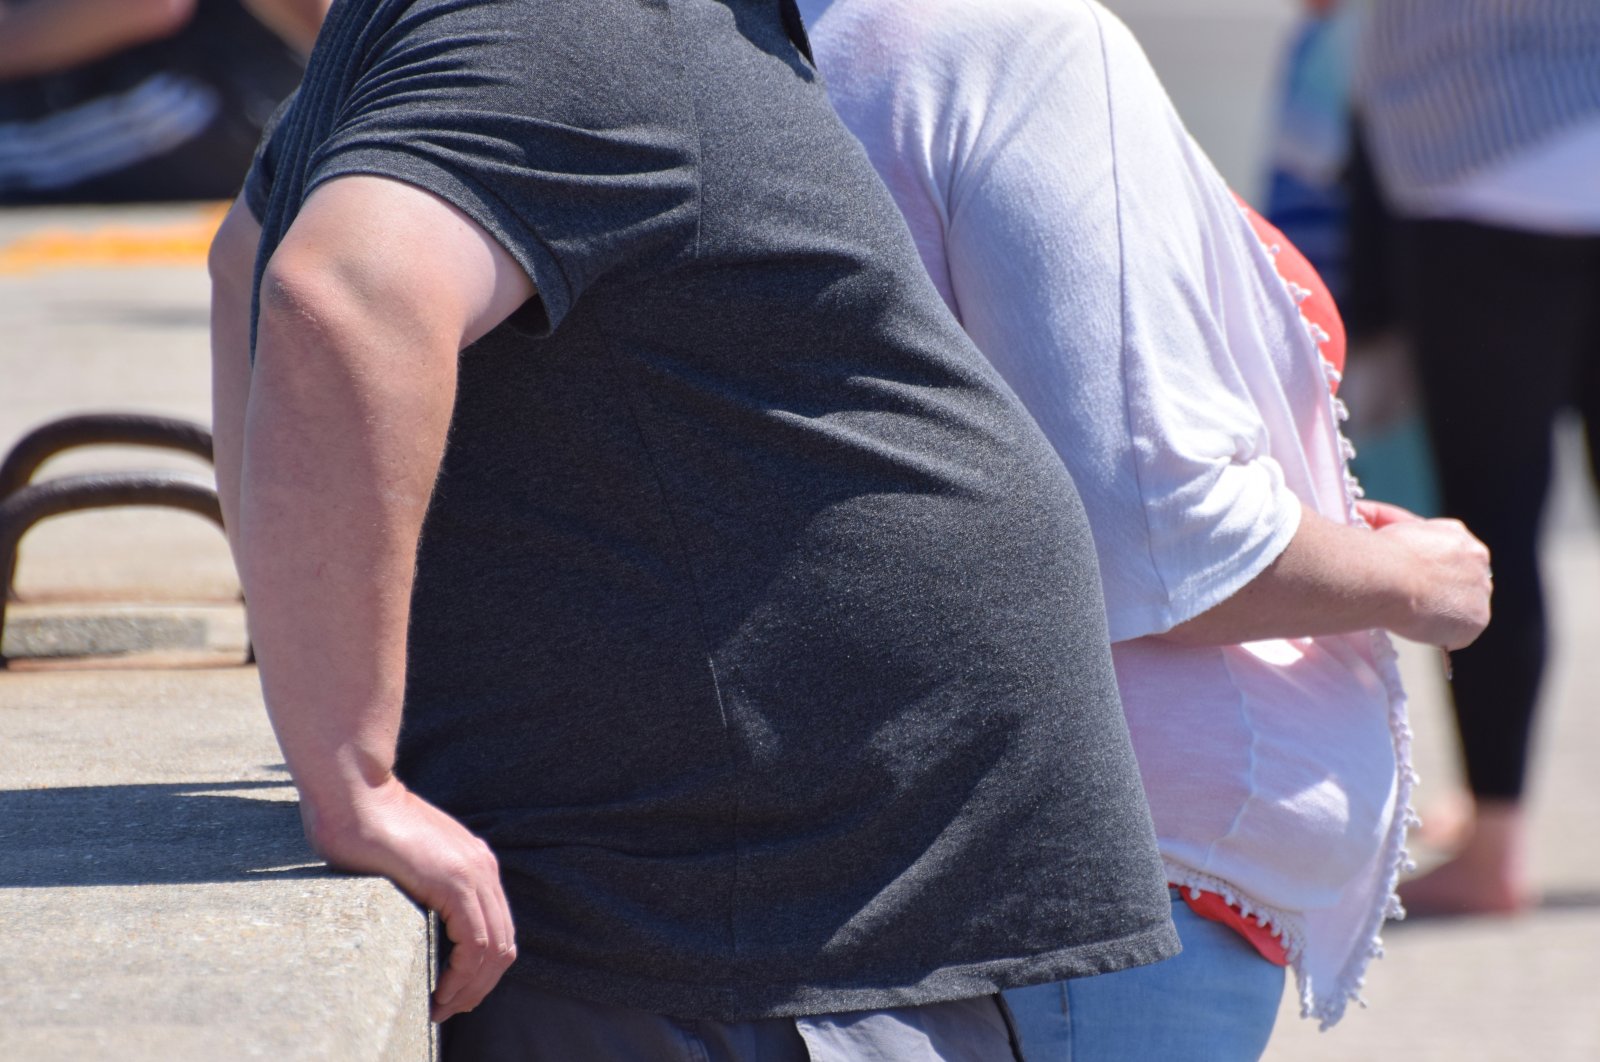 Obesity is a pressing global health issue, with one in five individuals in Türkiye affected, as reported by the Turkish Statistical Institute (TurkStat). (Shutterstock Photo)